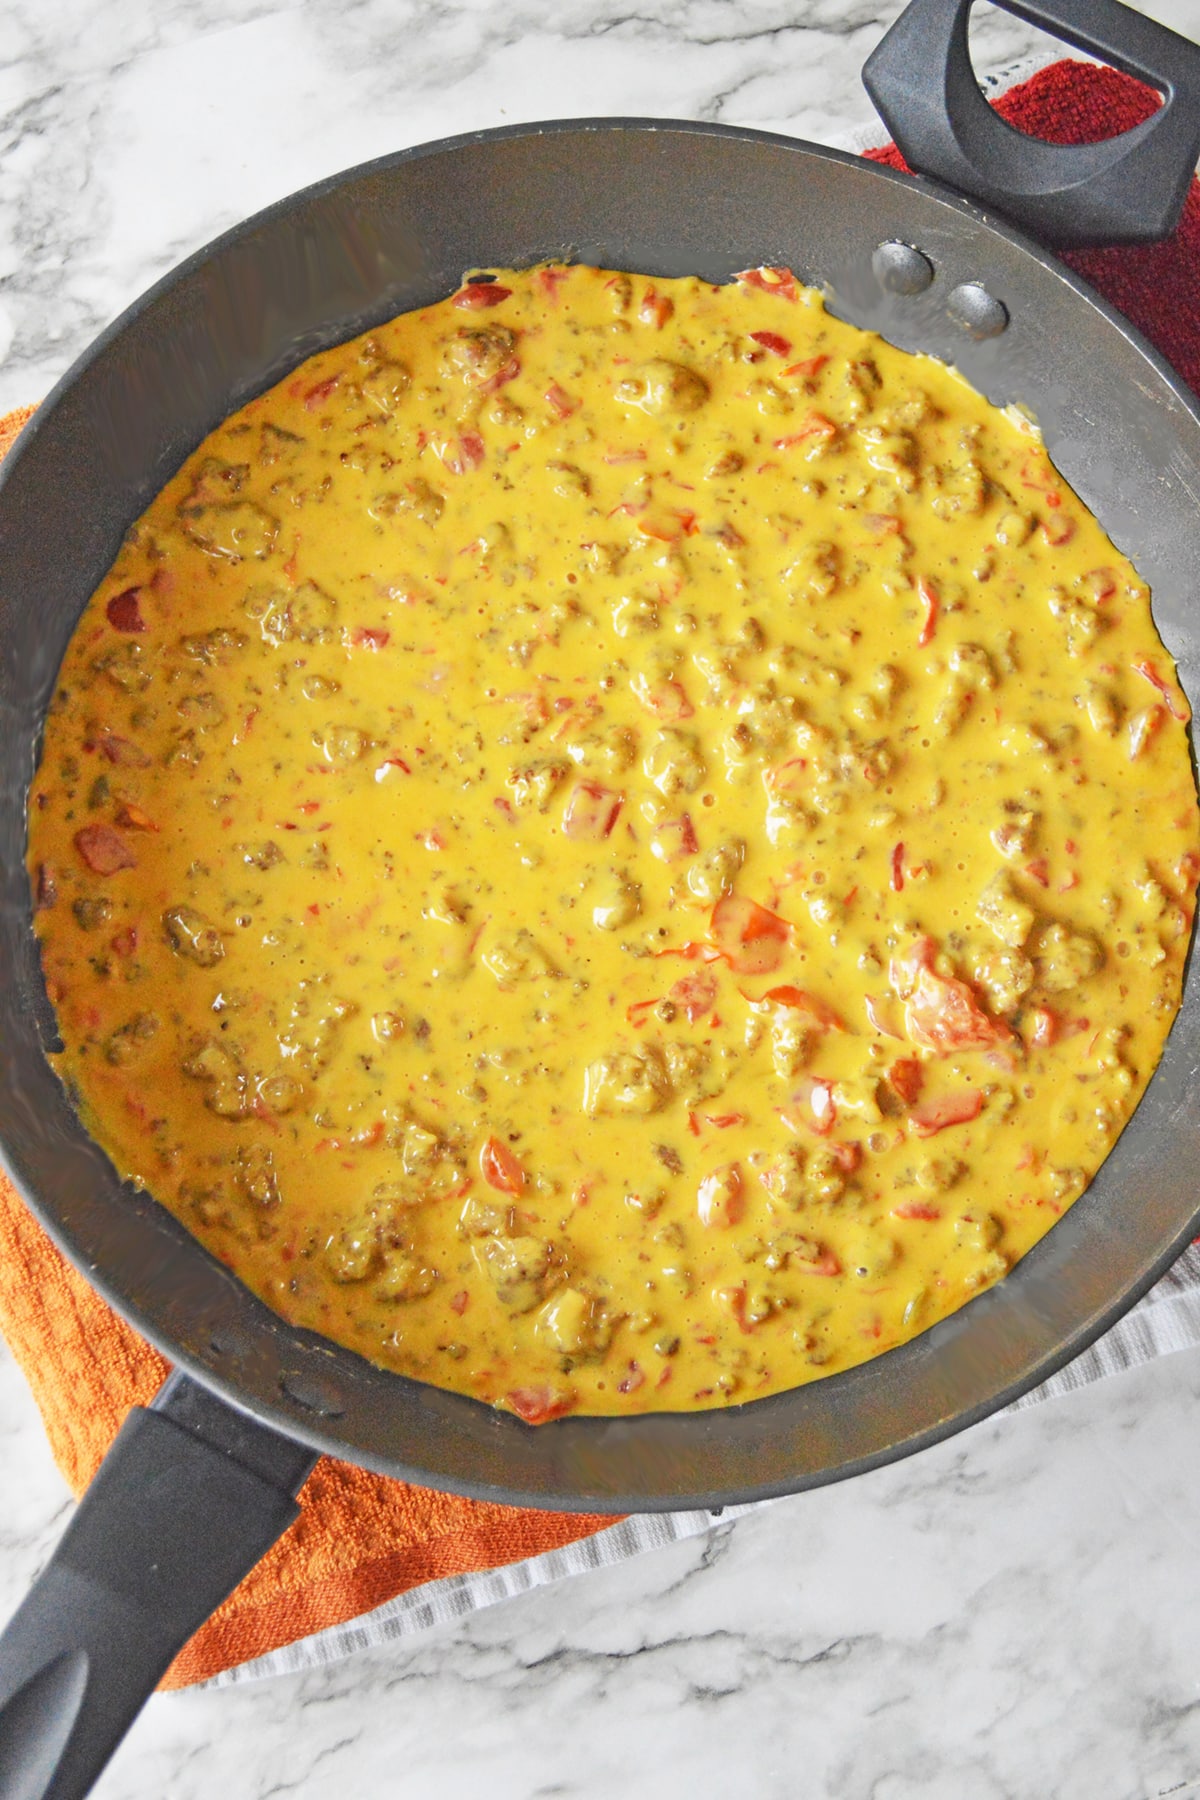 Rotel dip with sausage in a pan with melted cheese